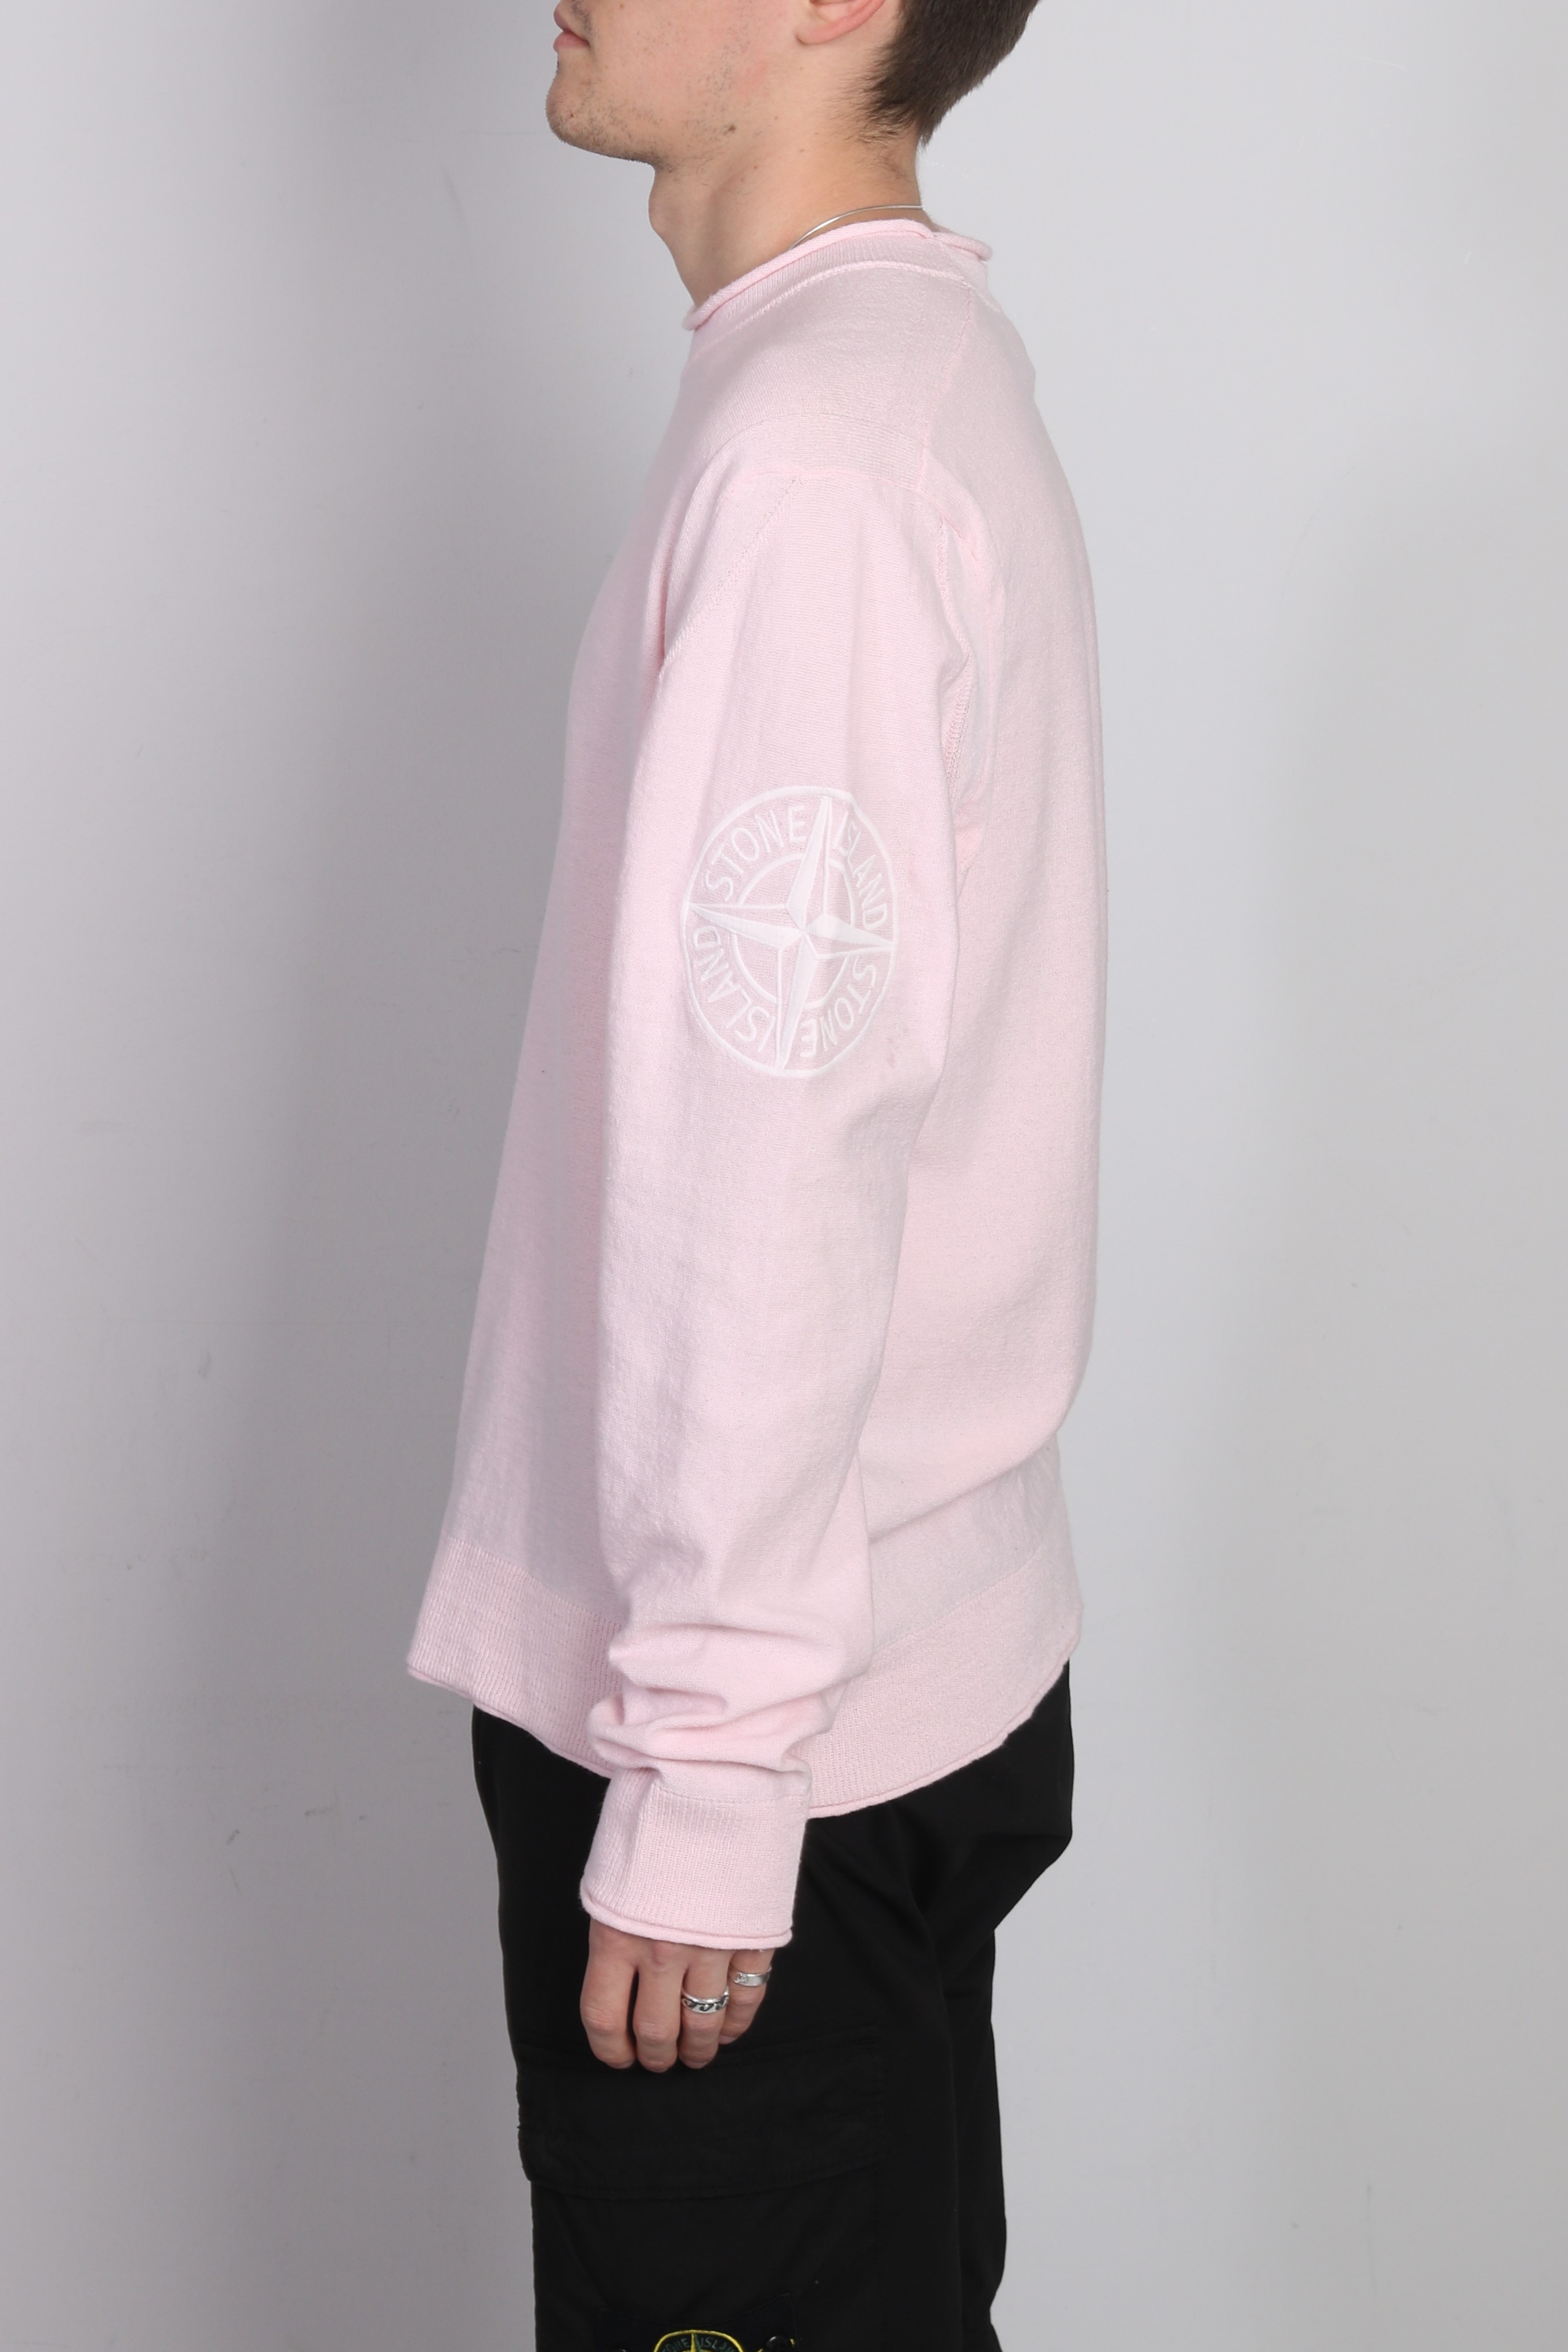 STONE ISLAND Cotton Knit Pullover in Light Pink 3XL